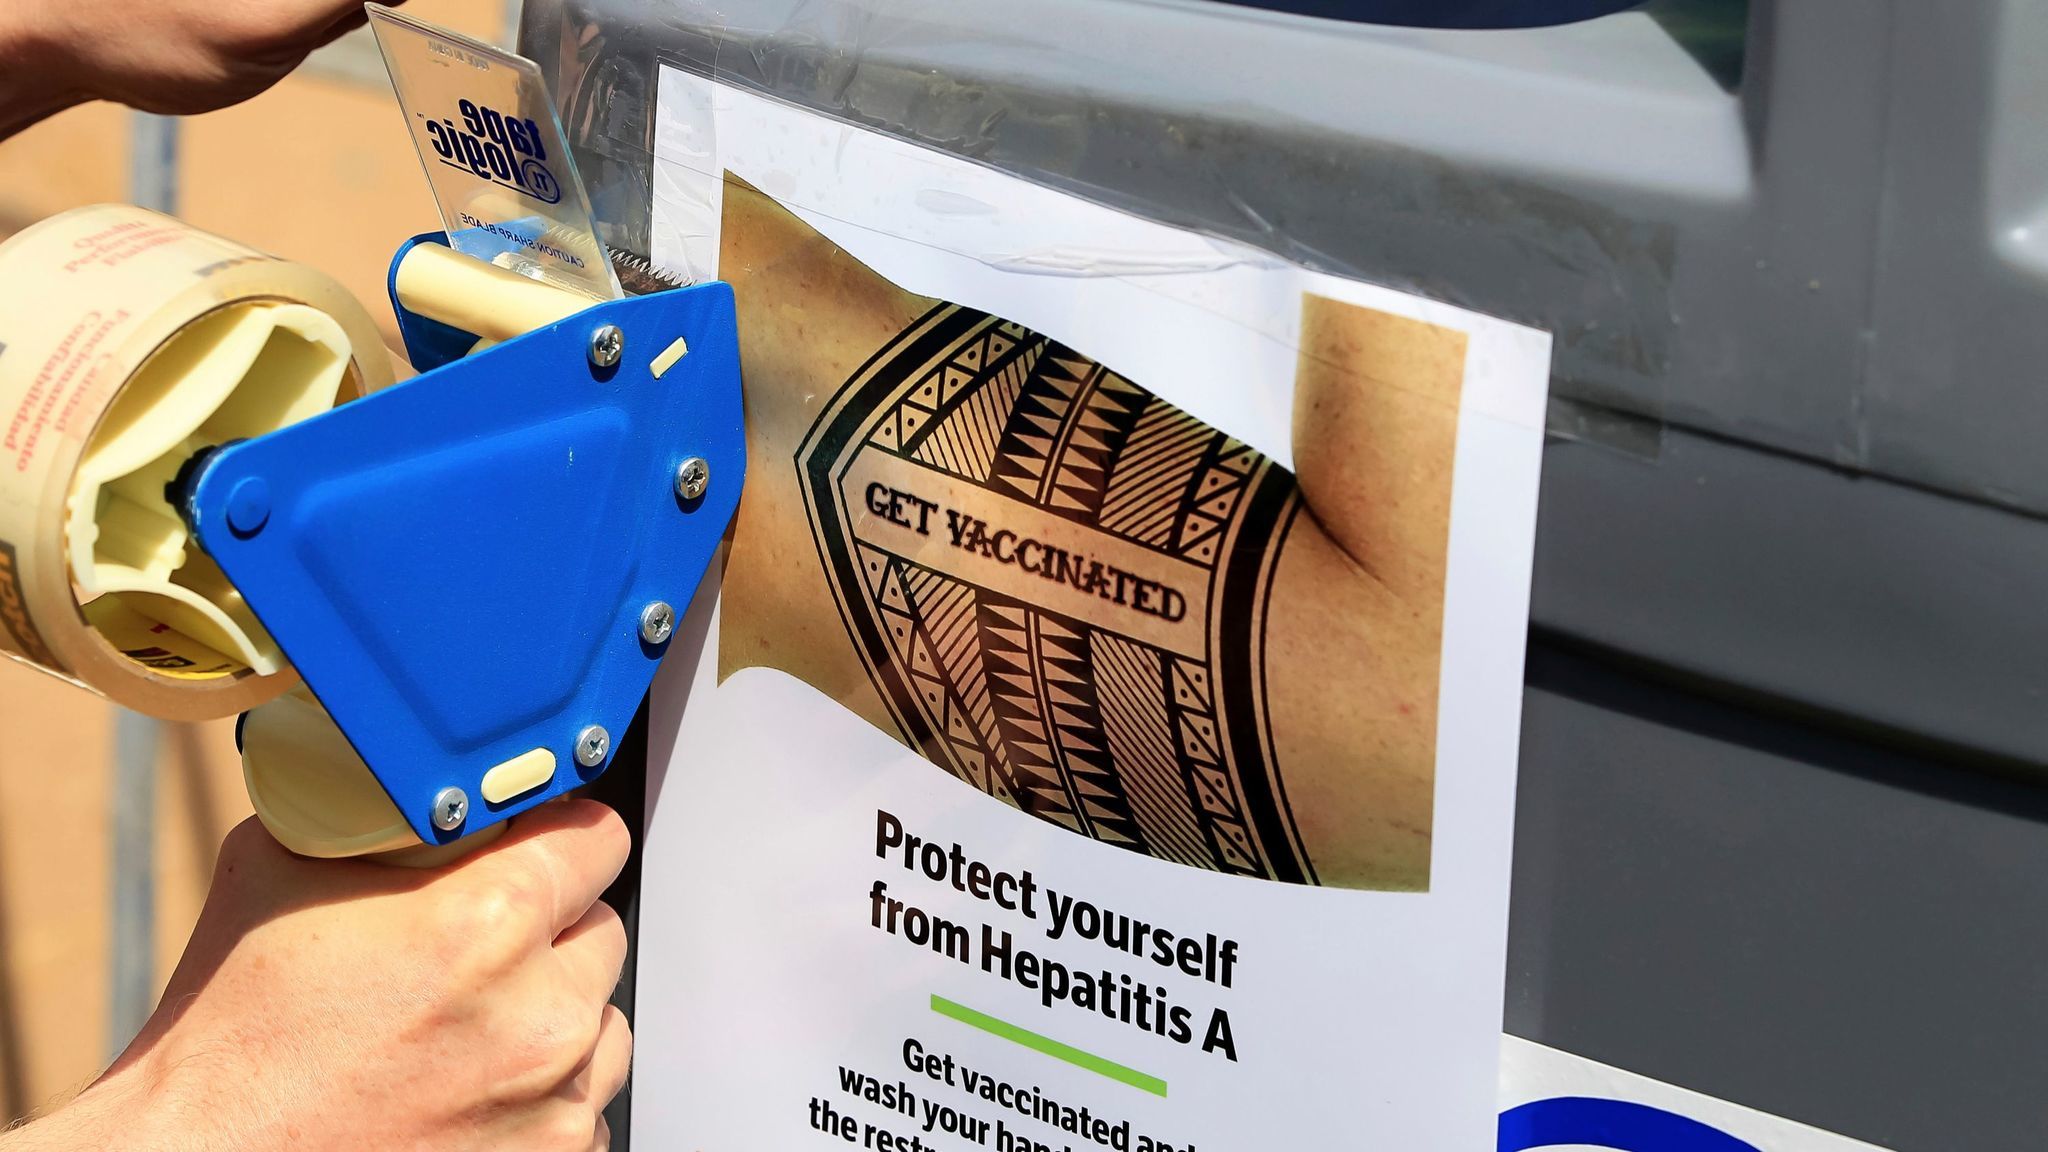 A worker tapes signage telling people to get vaccinated to protect themselves against Hepatitis A in downtown San Diego.